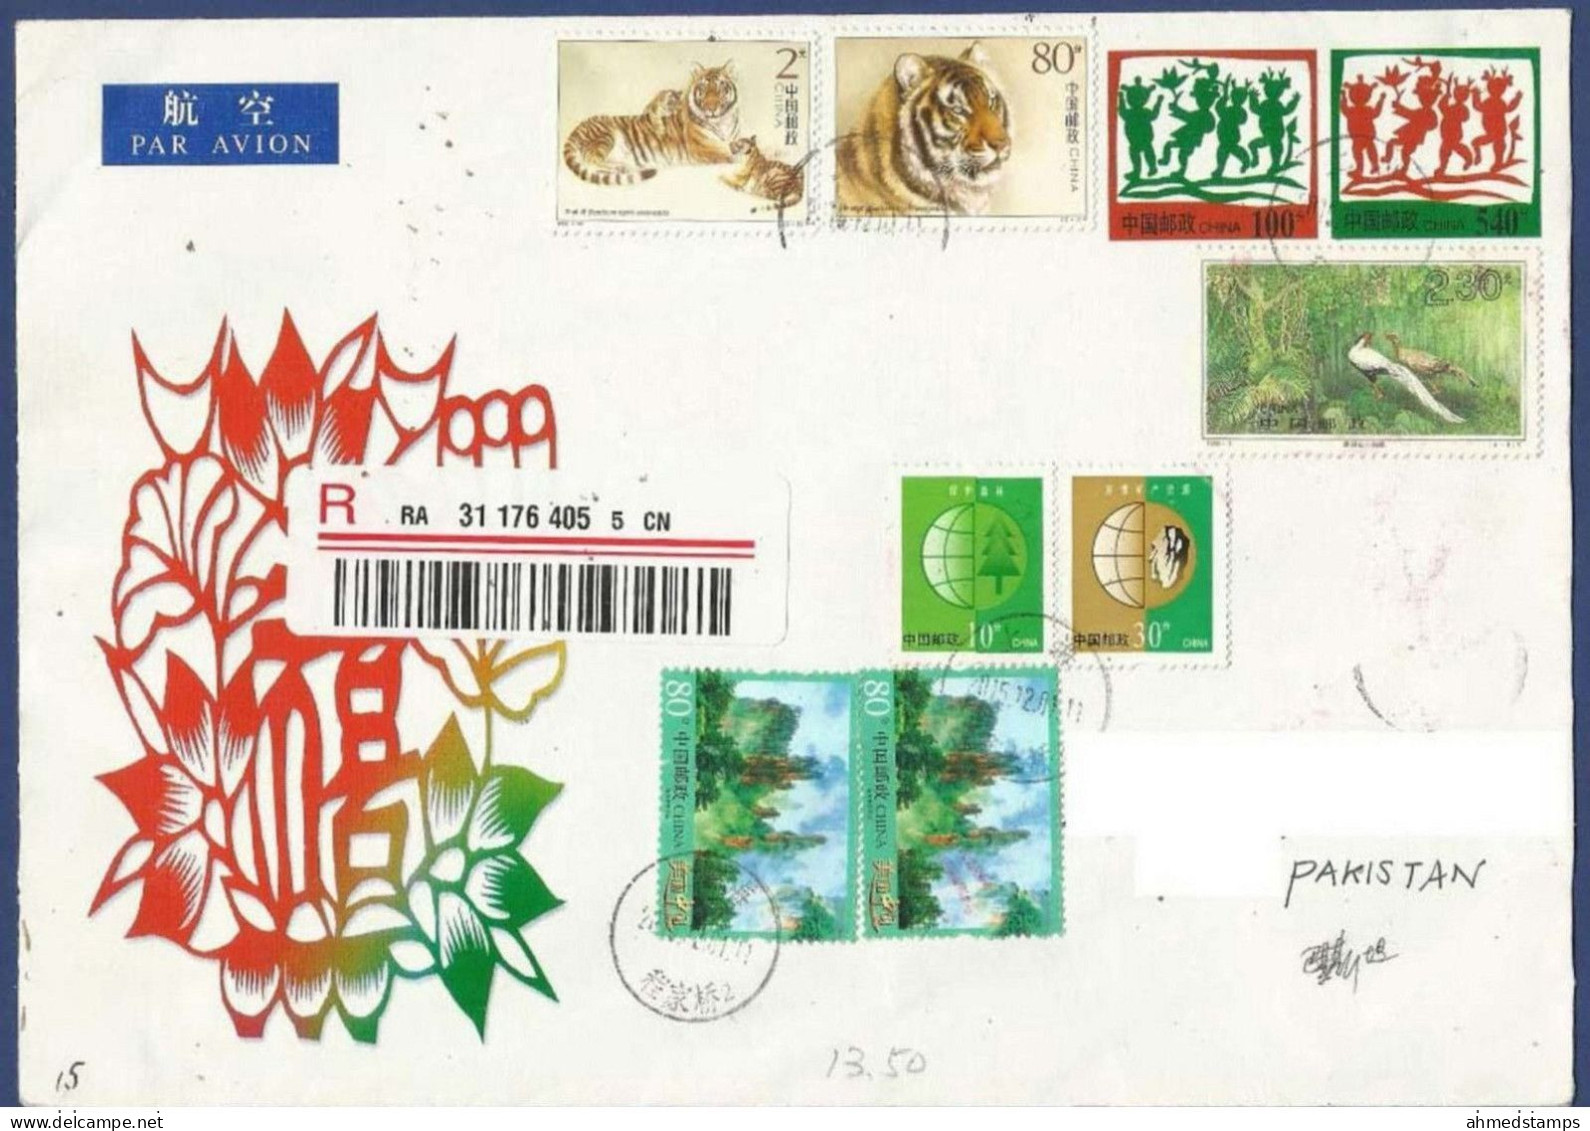 CHINA  REGISTERED POSTAL USED AIRMAIL COVER TO PAKISTAN - Posta Aerea